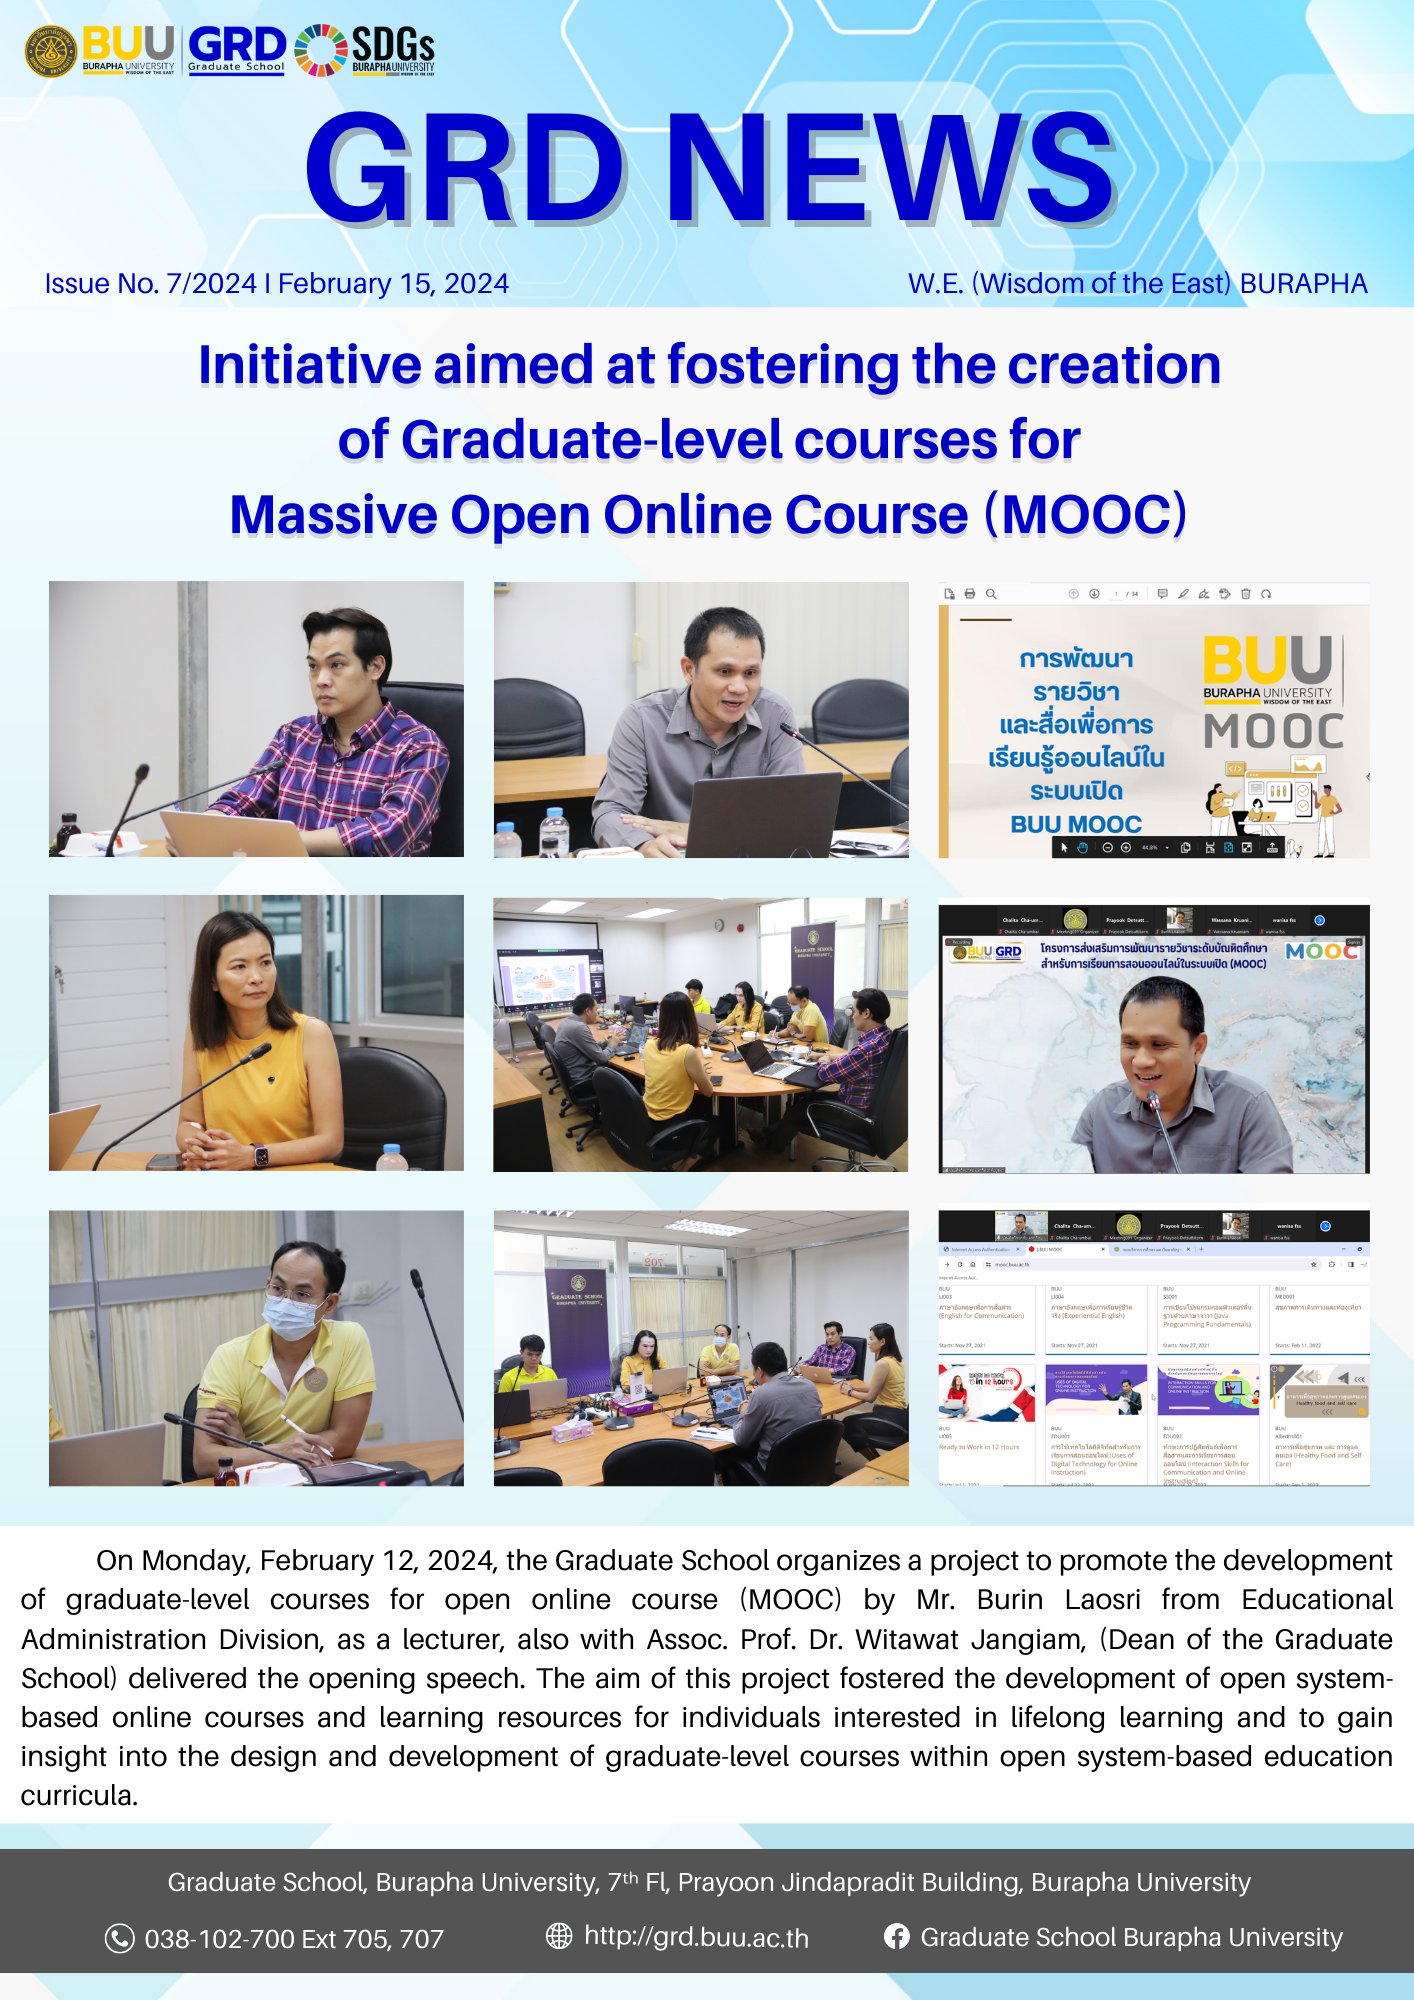 Initiative aimed at fostering the creation of Graduate-level courses for Massive Open Online Course (MOOC)